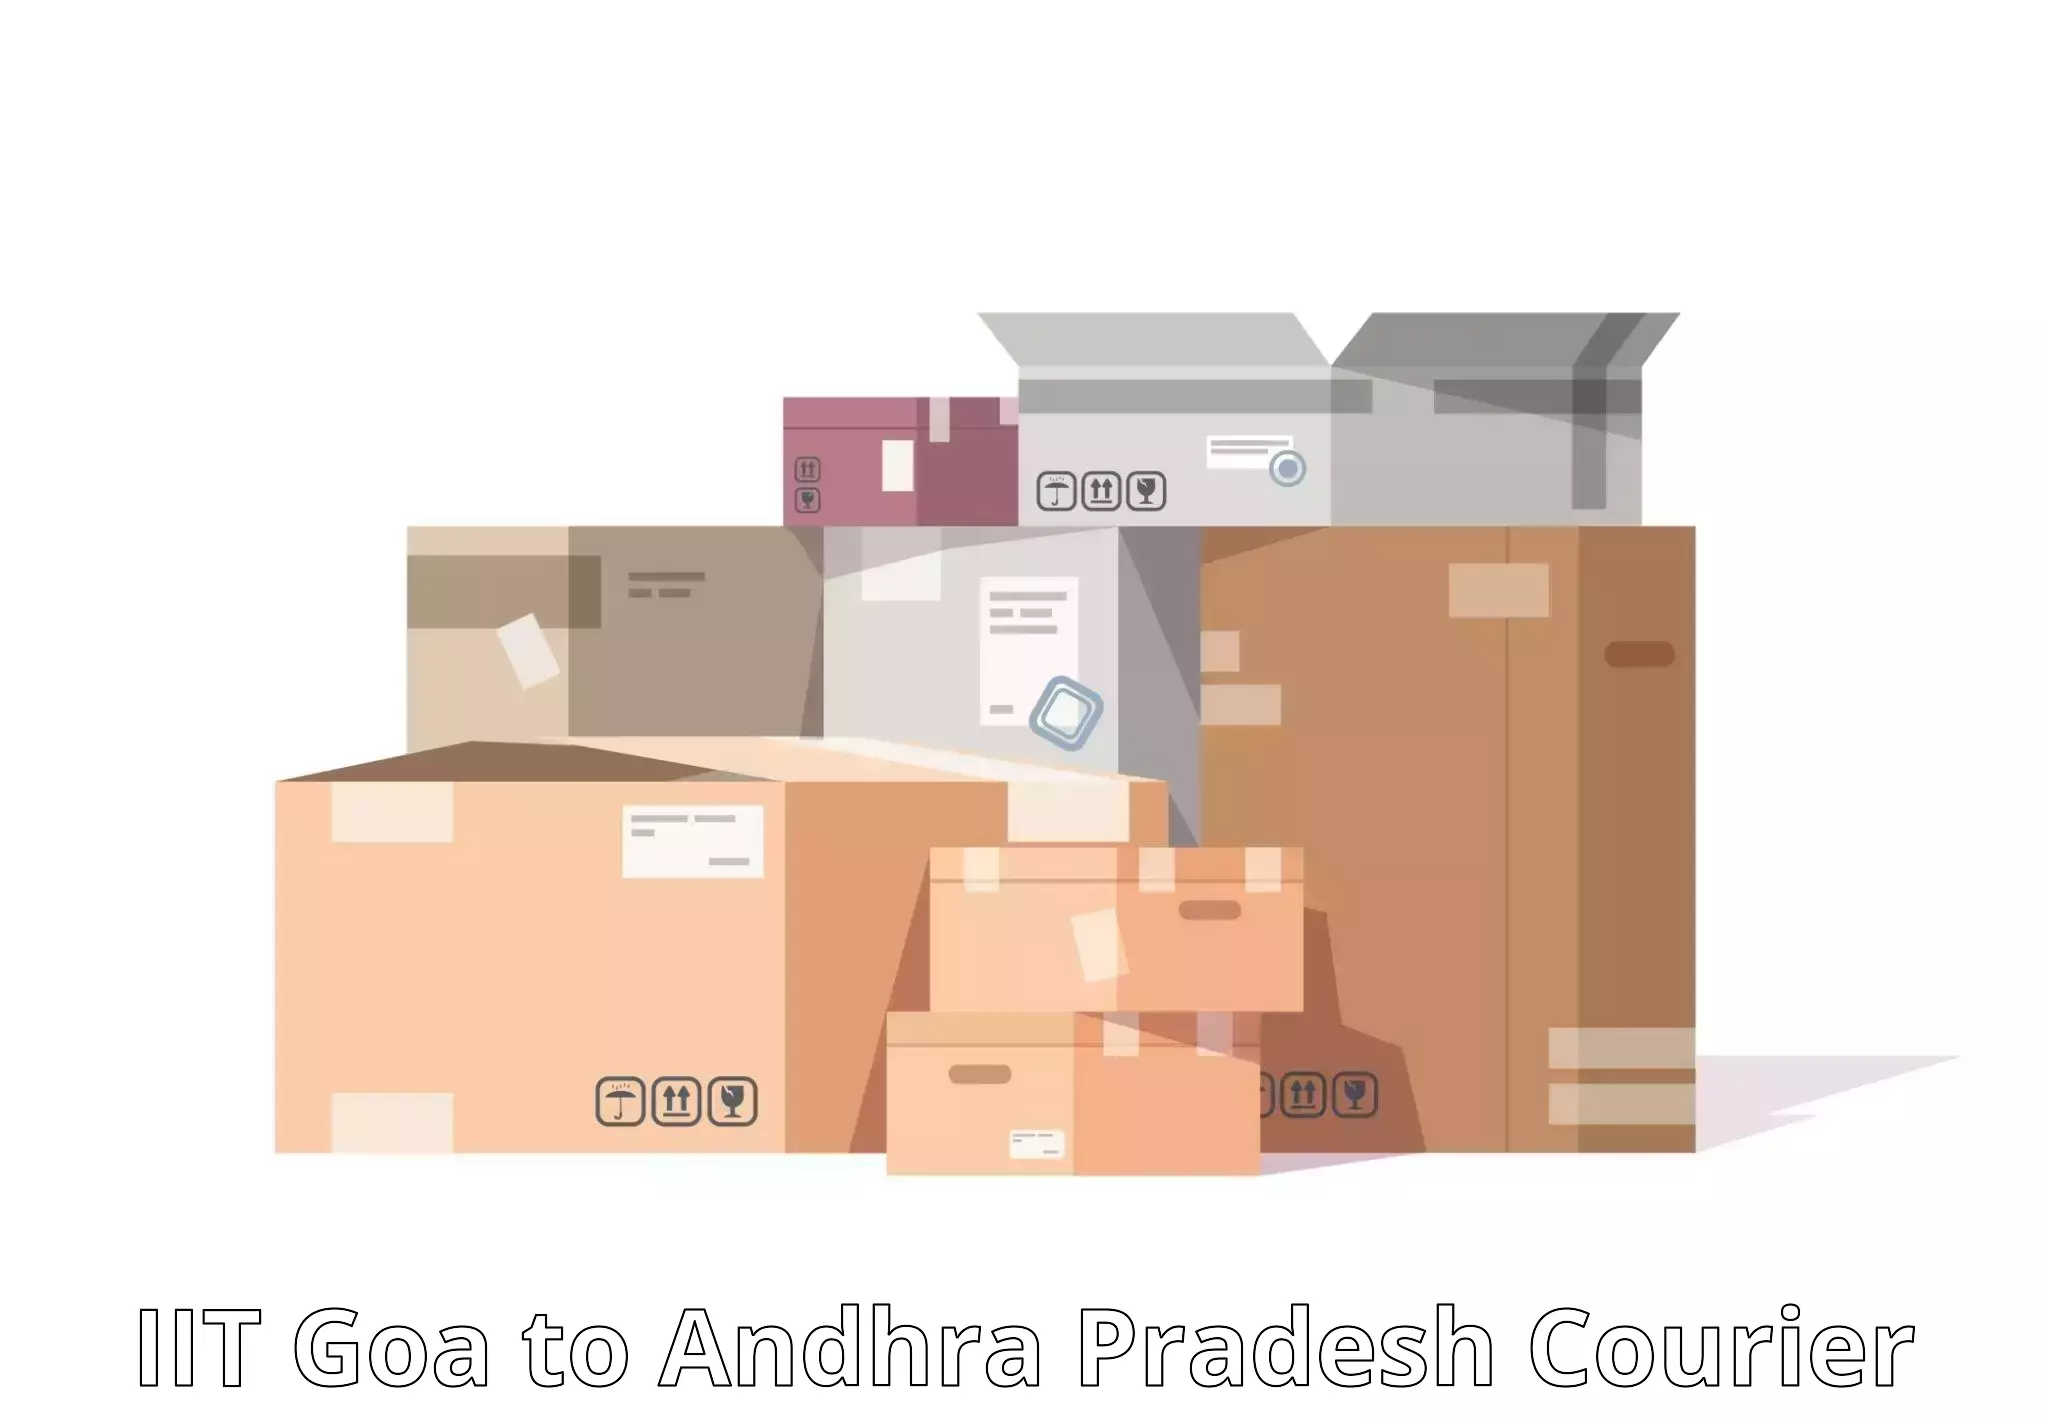 Same-day delivery solutions in IIT Goa to Andhra Pradesh